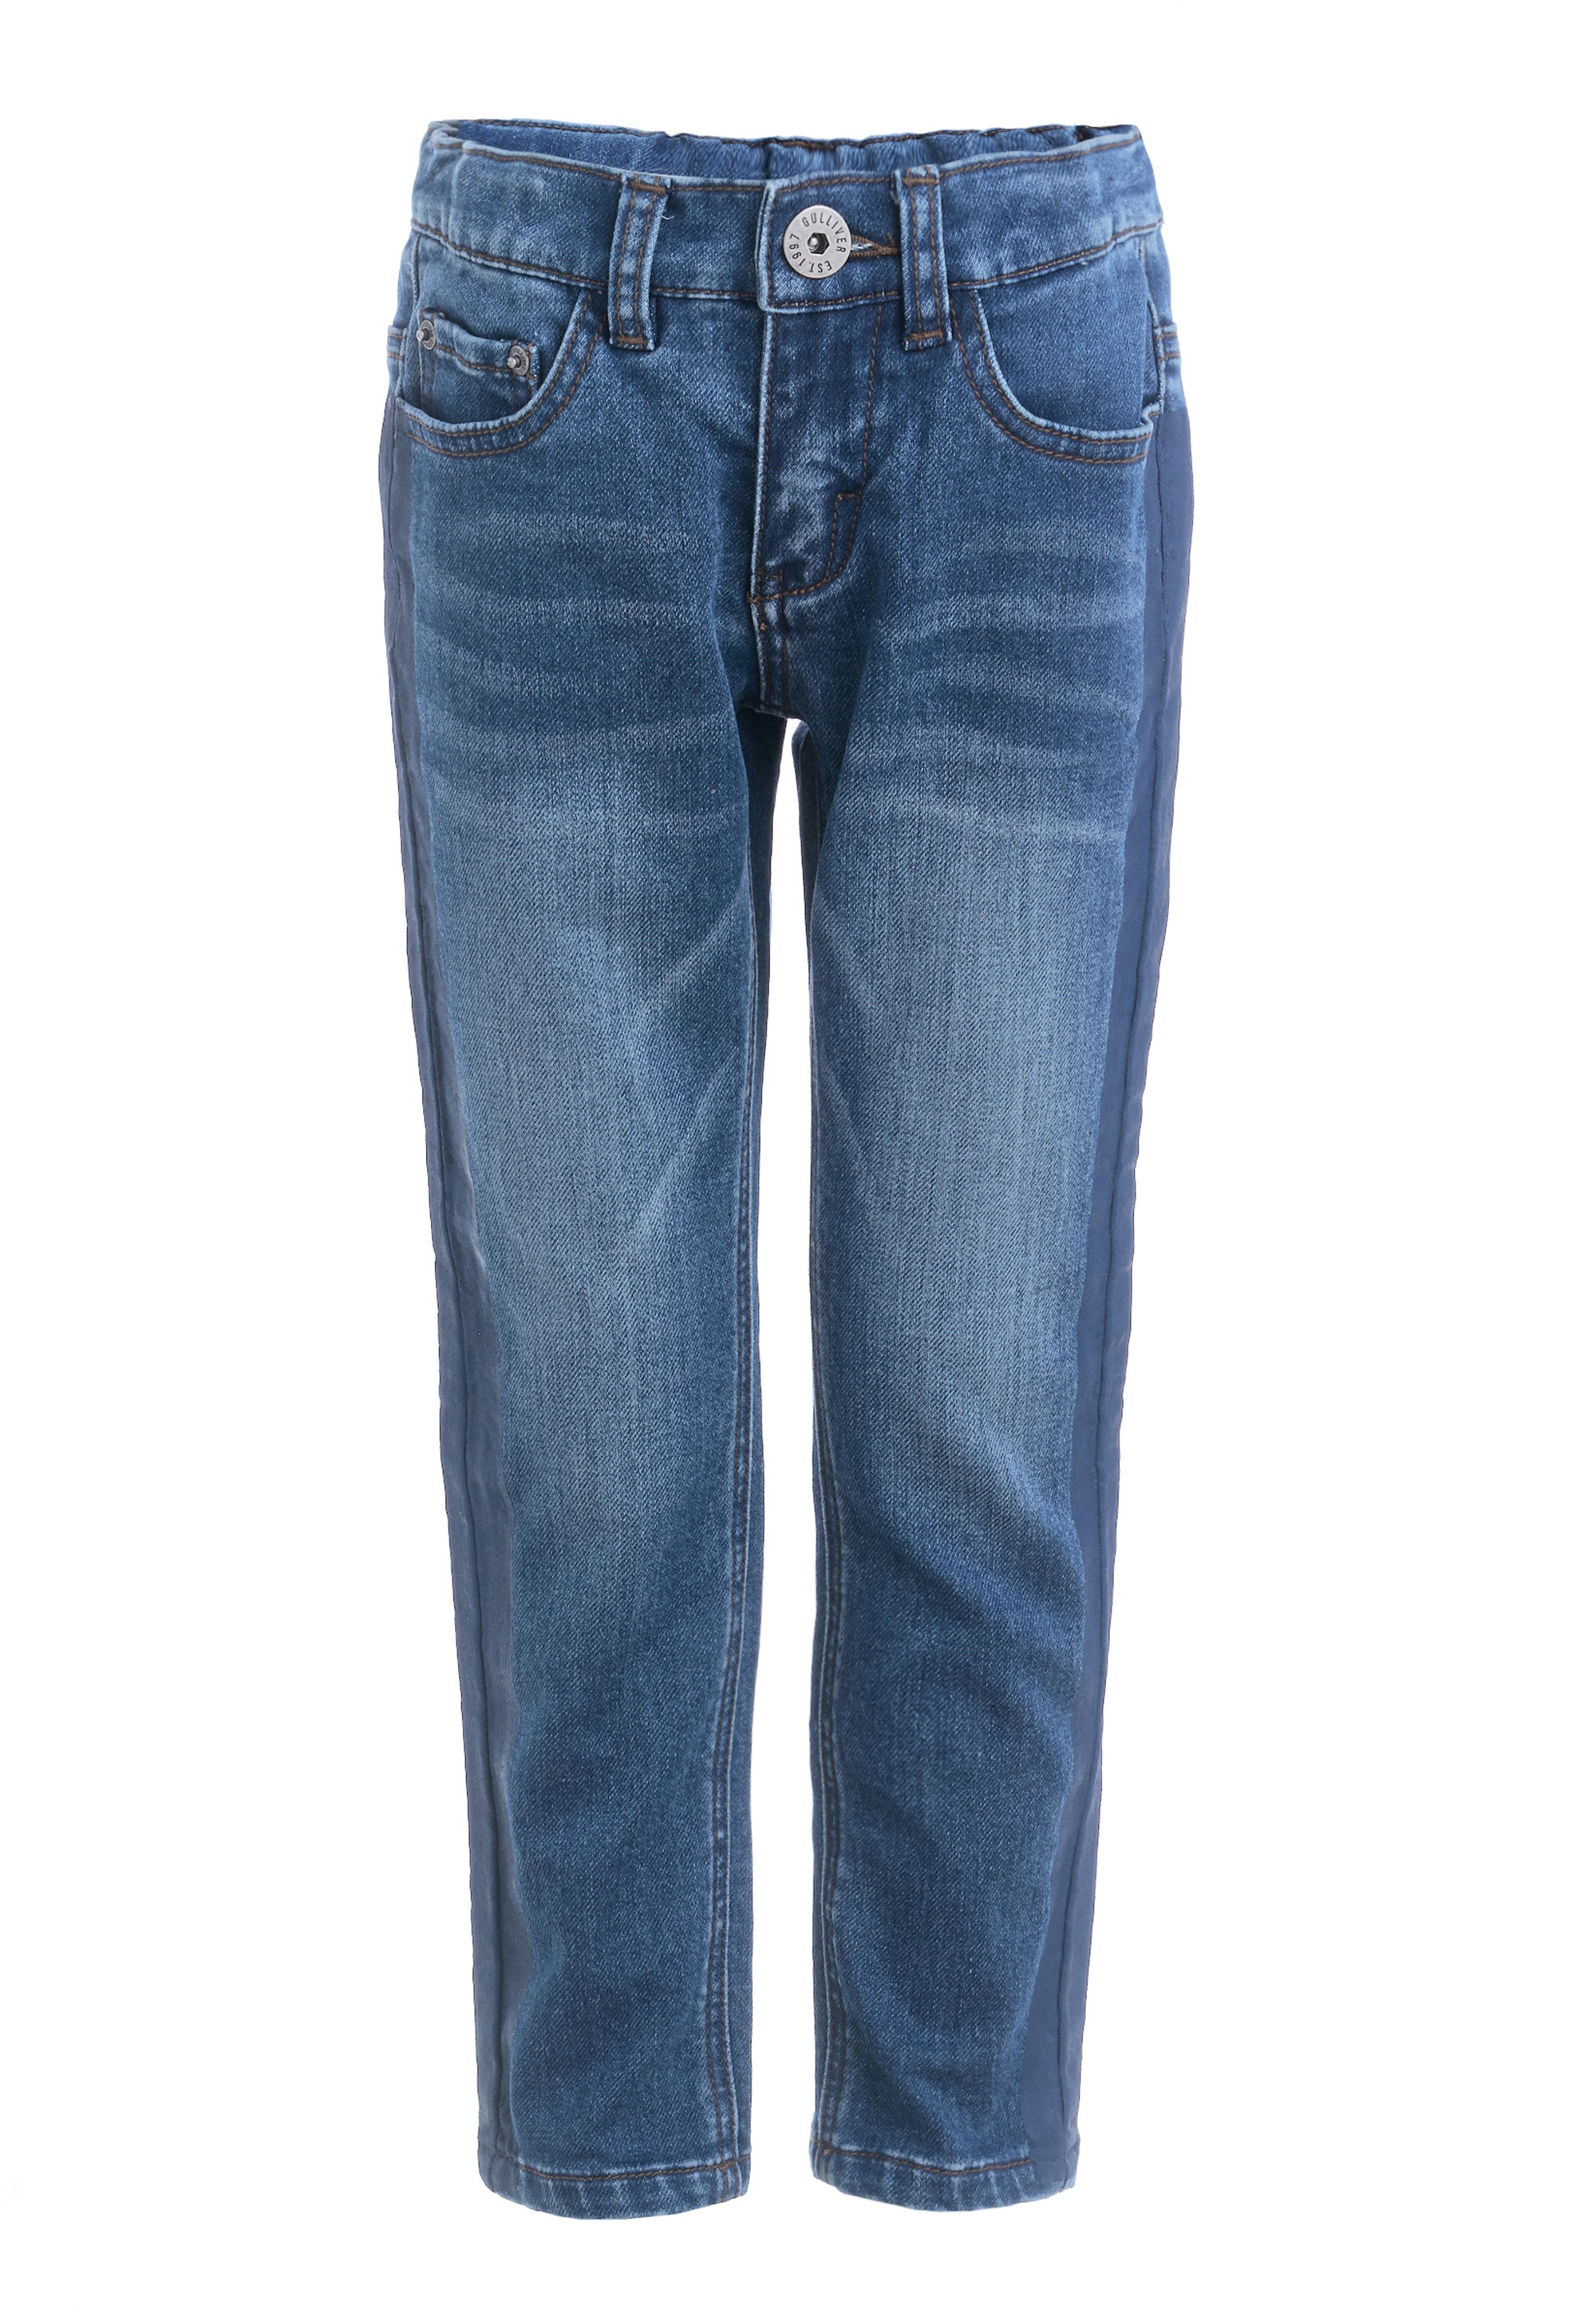 Gulliver Bequeme Jeans »Casual Denim Hose«, im Stone-Washed-Look